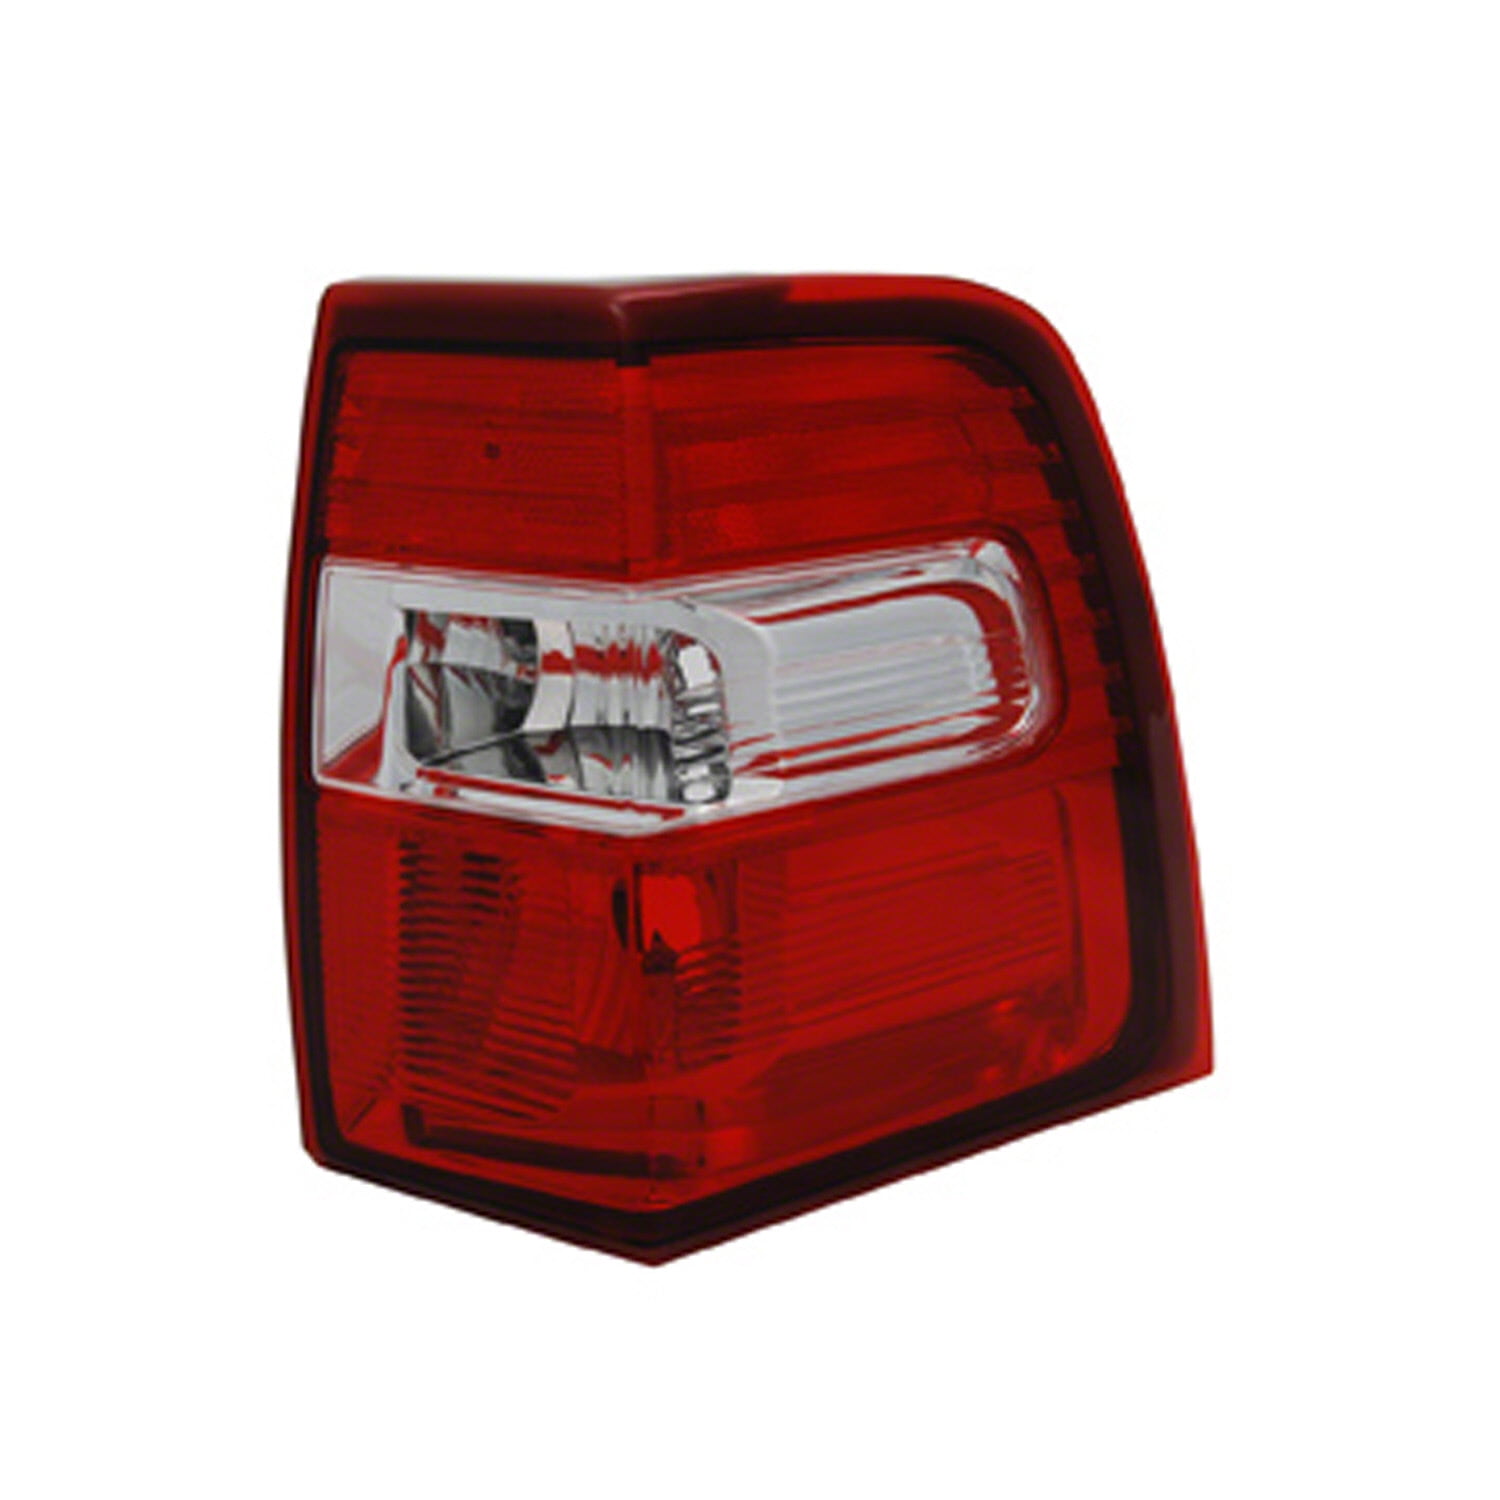 New Economy Replacement Right Tail Light, Fits 2007-2017 Ford Expedition - Walmart.com - Walmart.com 2007 Ford Expedition Tail Light Bulb Replacement